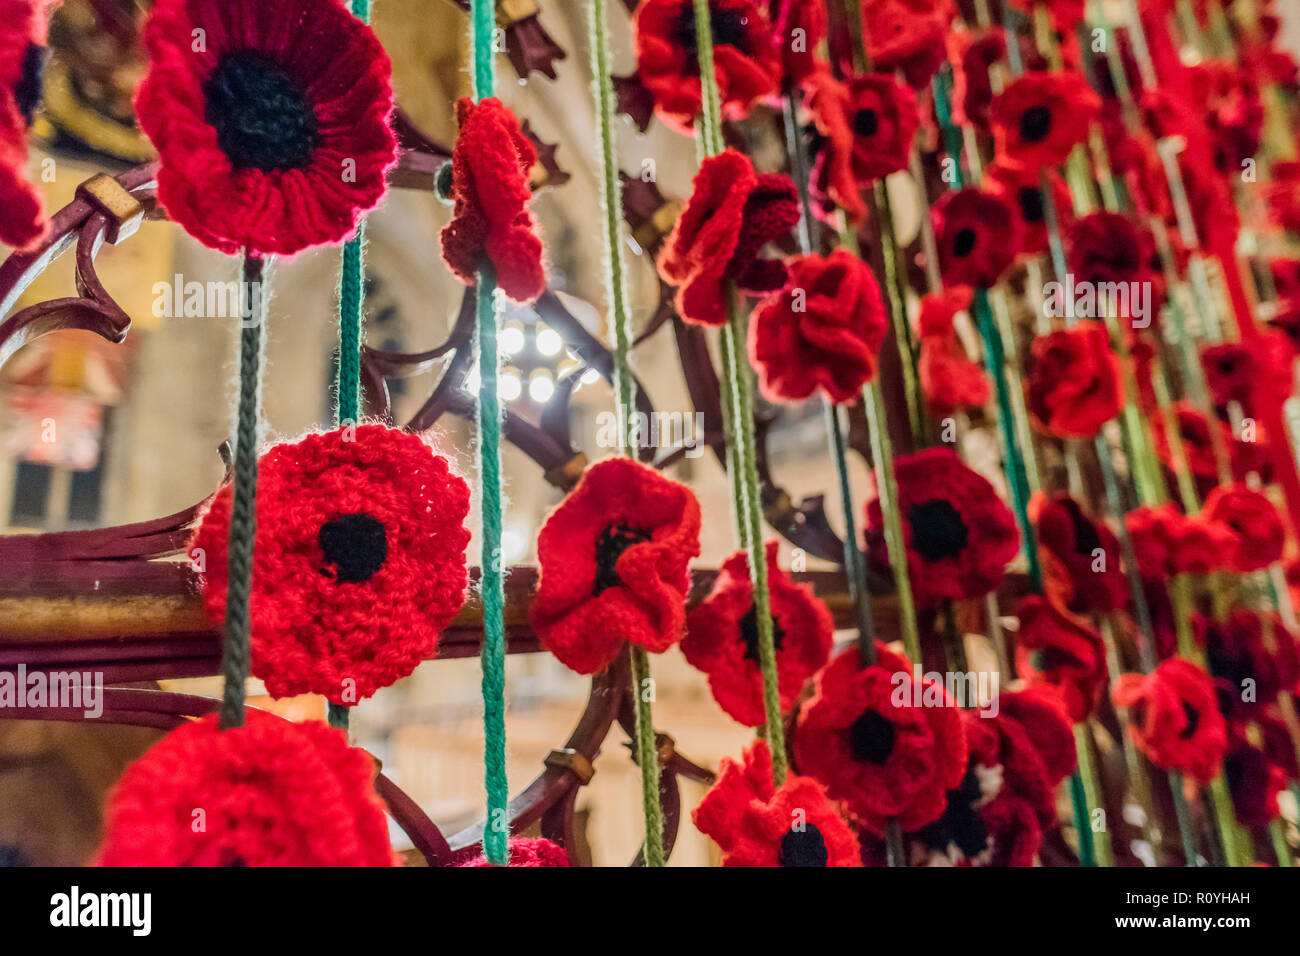 Norwich, UK. 7th November, 2018. We will remember them - A curtain of poppies shrouds the entrance to St saviours Chapel which houses memorials to the fallen of the Norfolk Regiment - inspired by the ladies of the Knapton Knitters. Evensong attended by the Archbishop of Canterbury and the Bishop of Norwich, on the theme of reconciliation, in Norwich Cathedral. Credit: Guy Bell/Alamy Live News Stock Photo